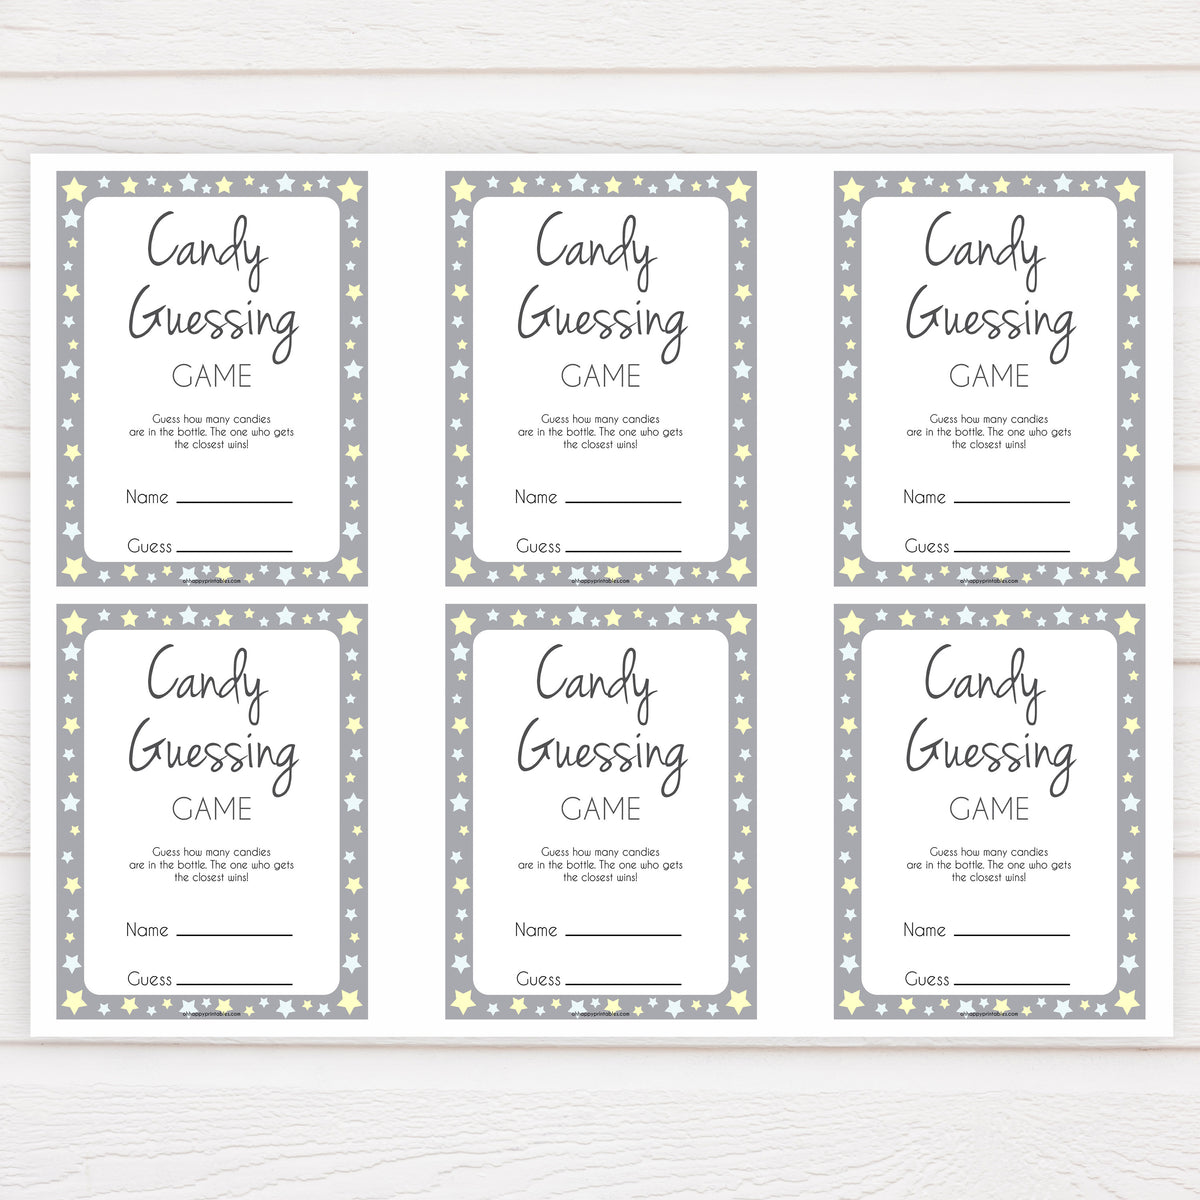 Candy Guessing Game Free Printable